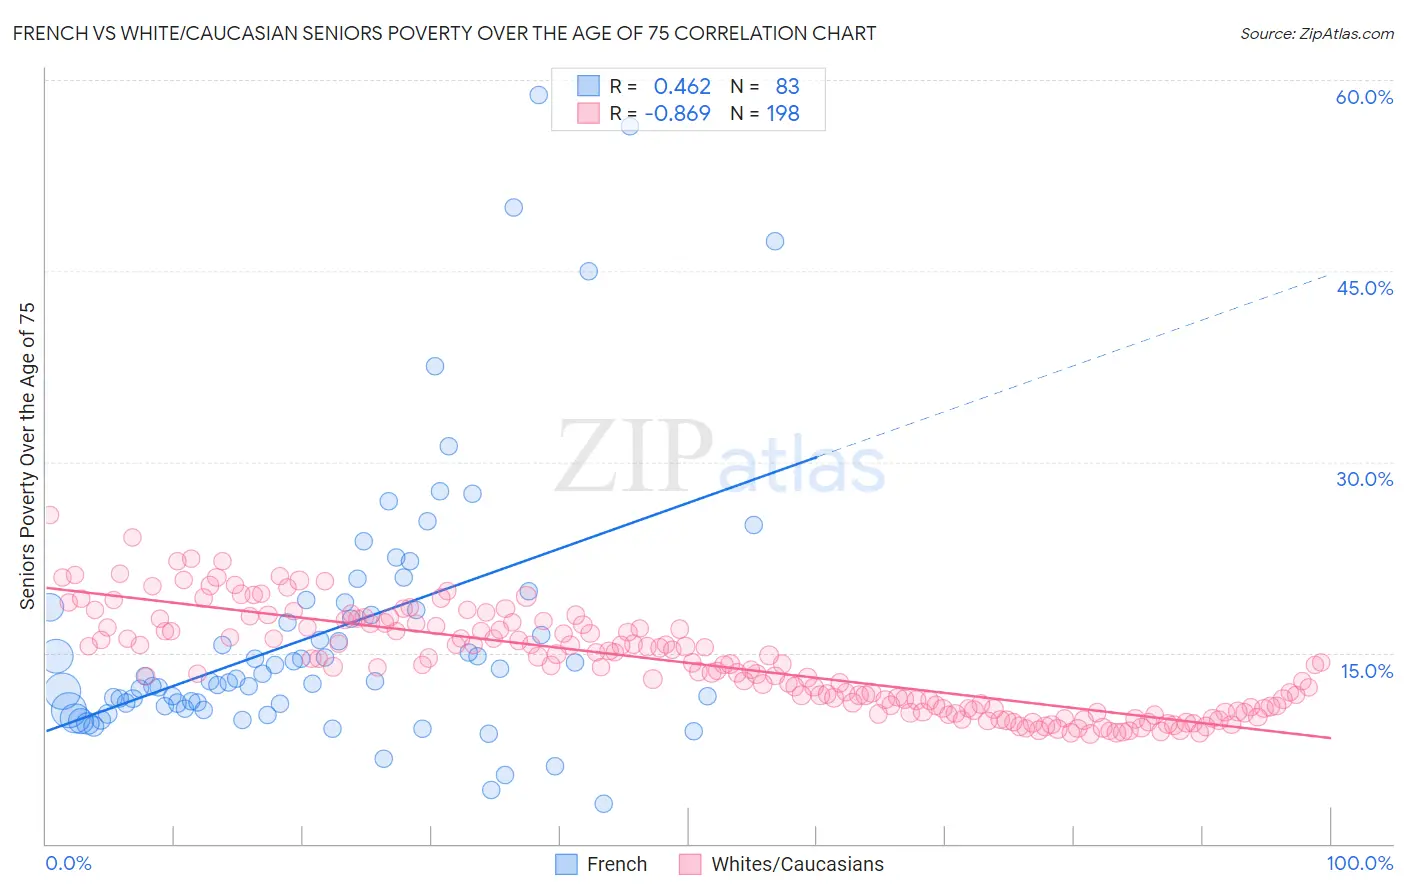 French vs White/Caucasian Seniors Poverty Over the Age of 75